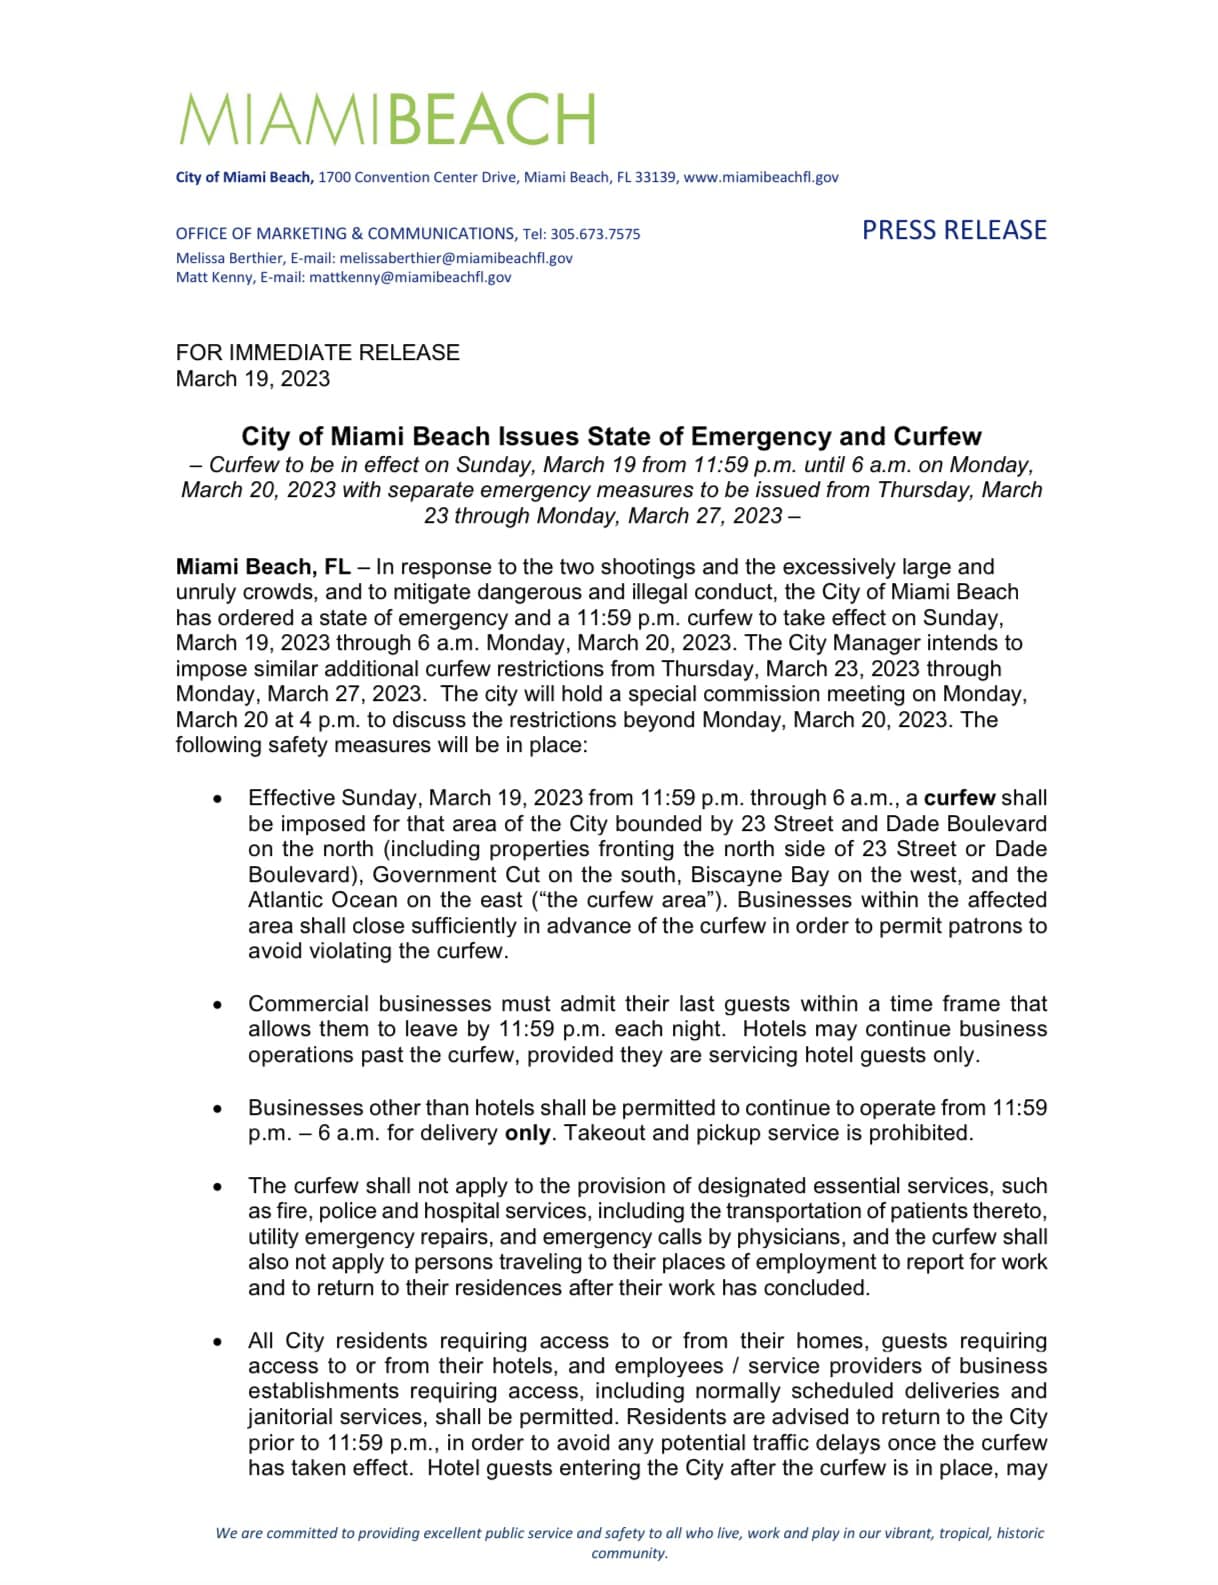 City of Miami Beach Declares State of Emergency, Implements Curfew